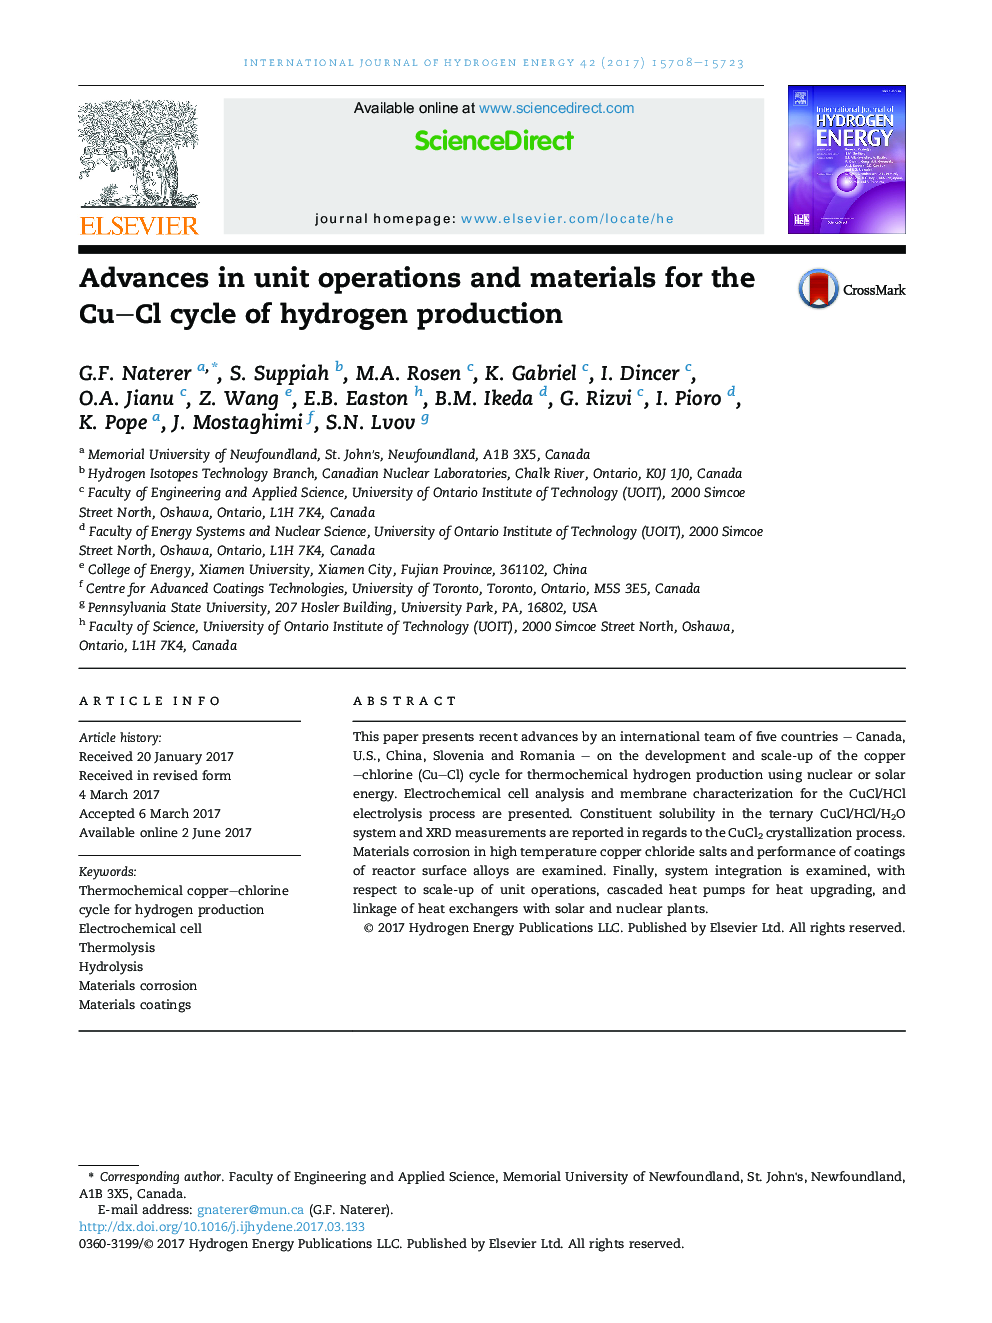 Advances in unit operations and materials for the CuCl cycle of hydrogen production